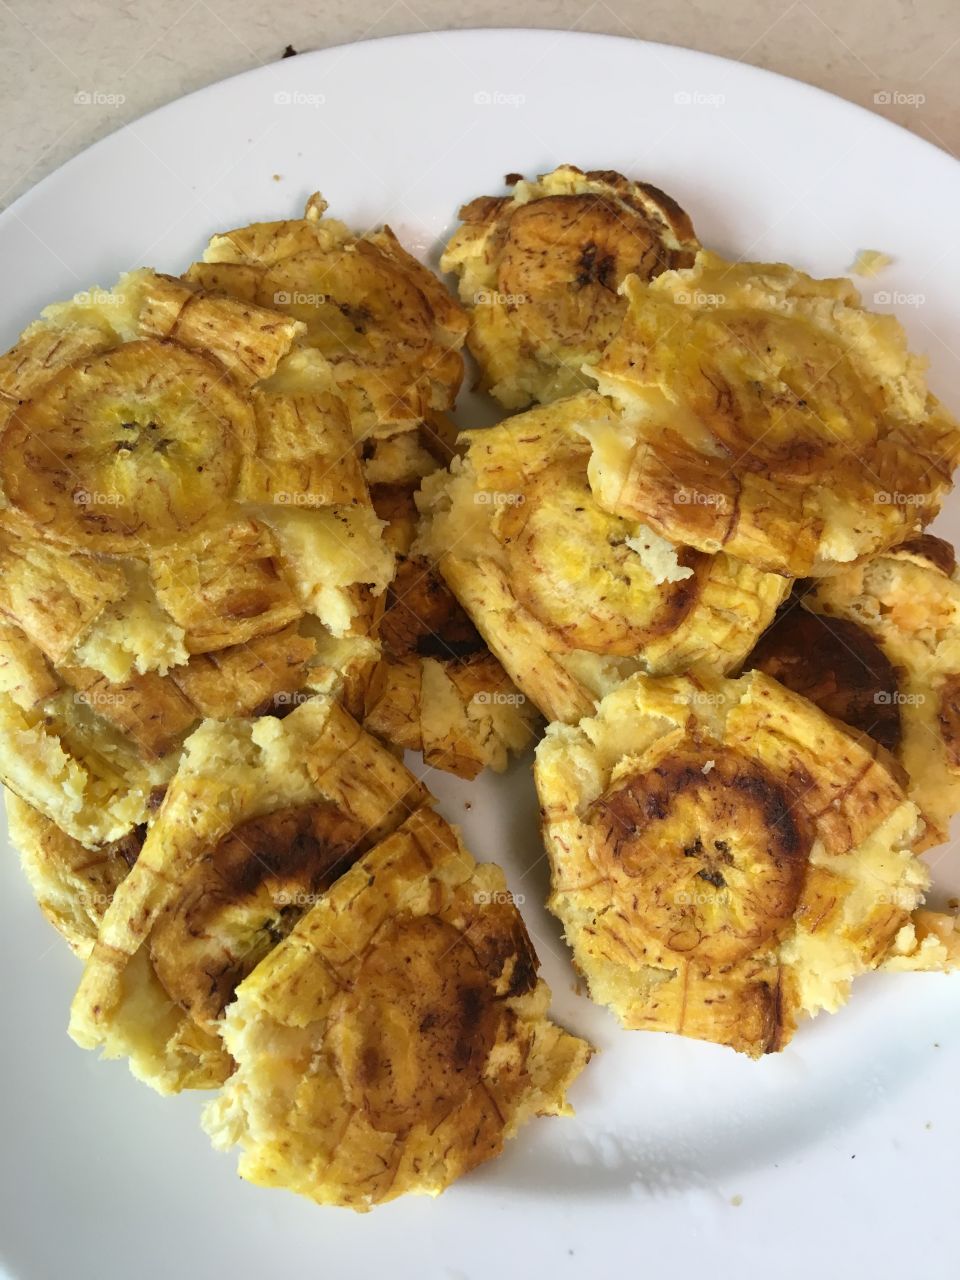 Fried sliced plantain - tostones